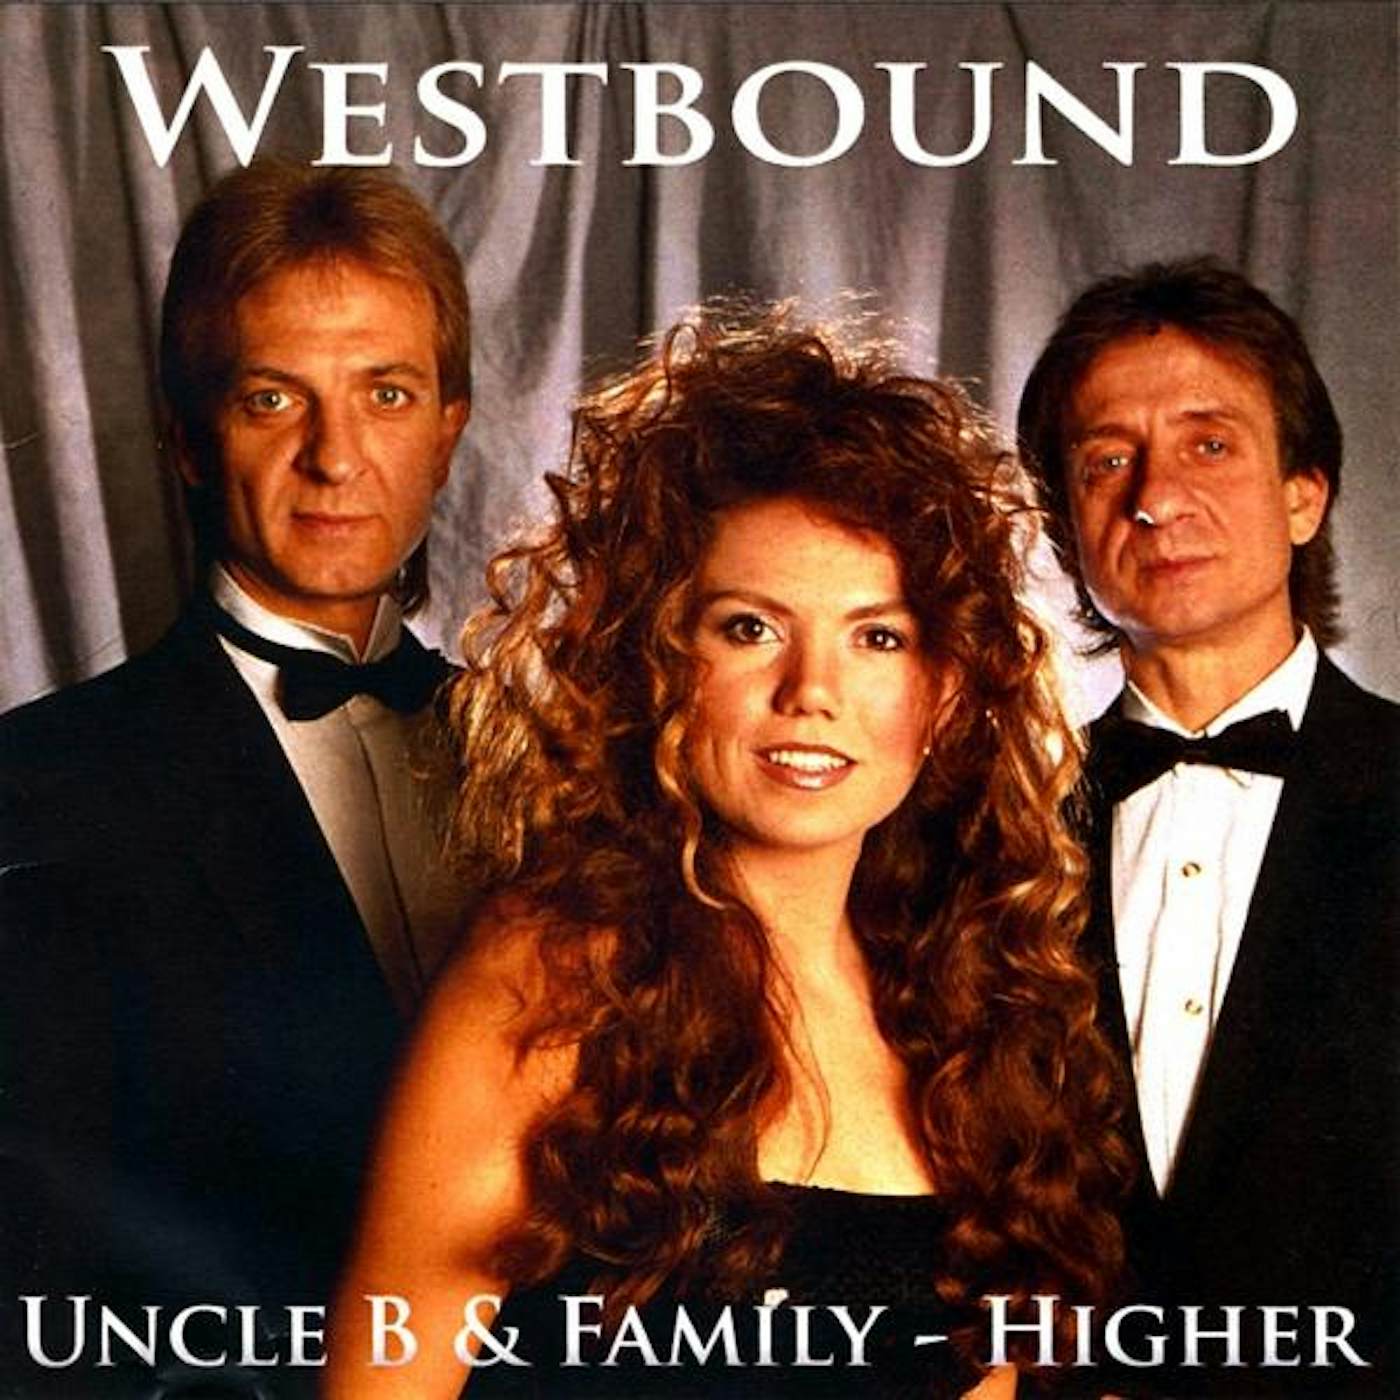 Westbound UNCLE B & FAMILY - HIGHER CD